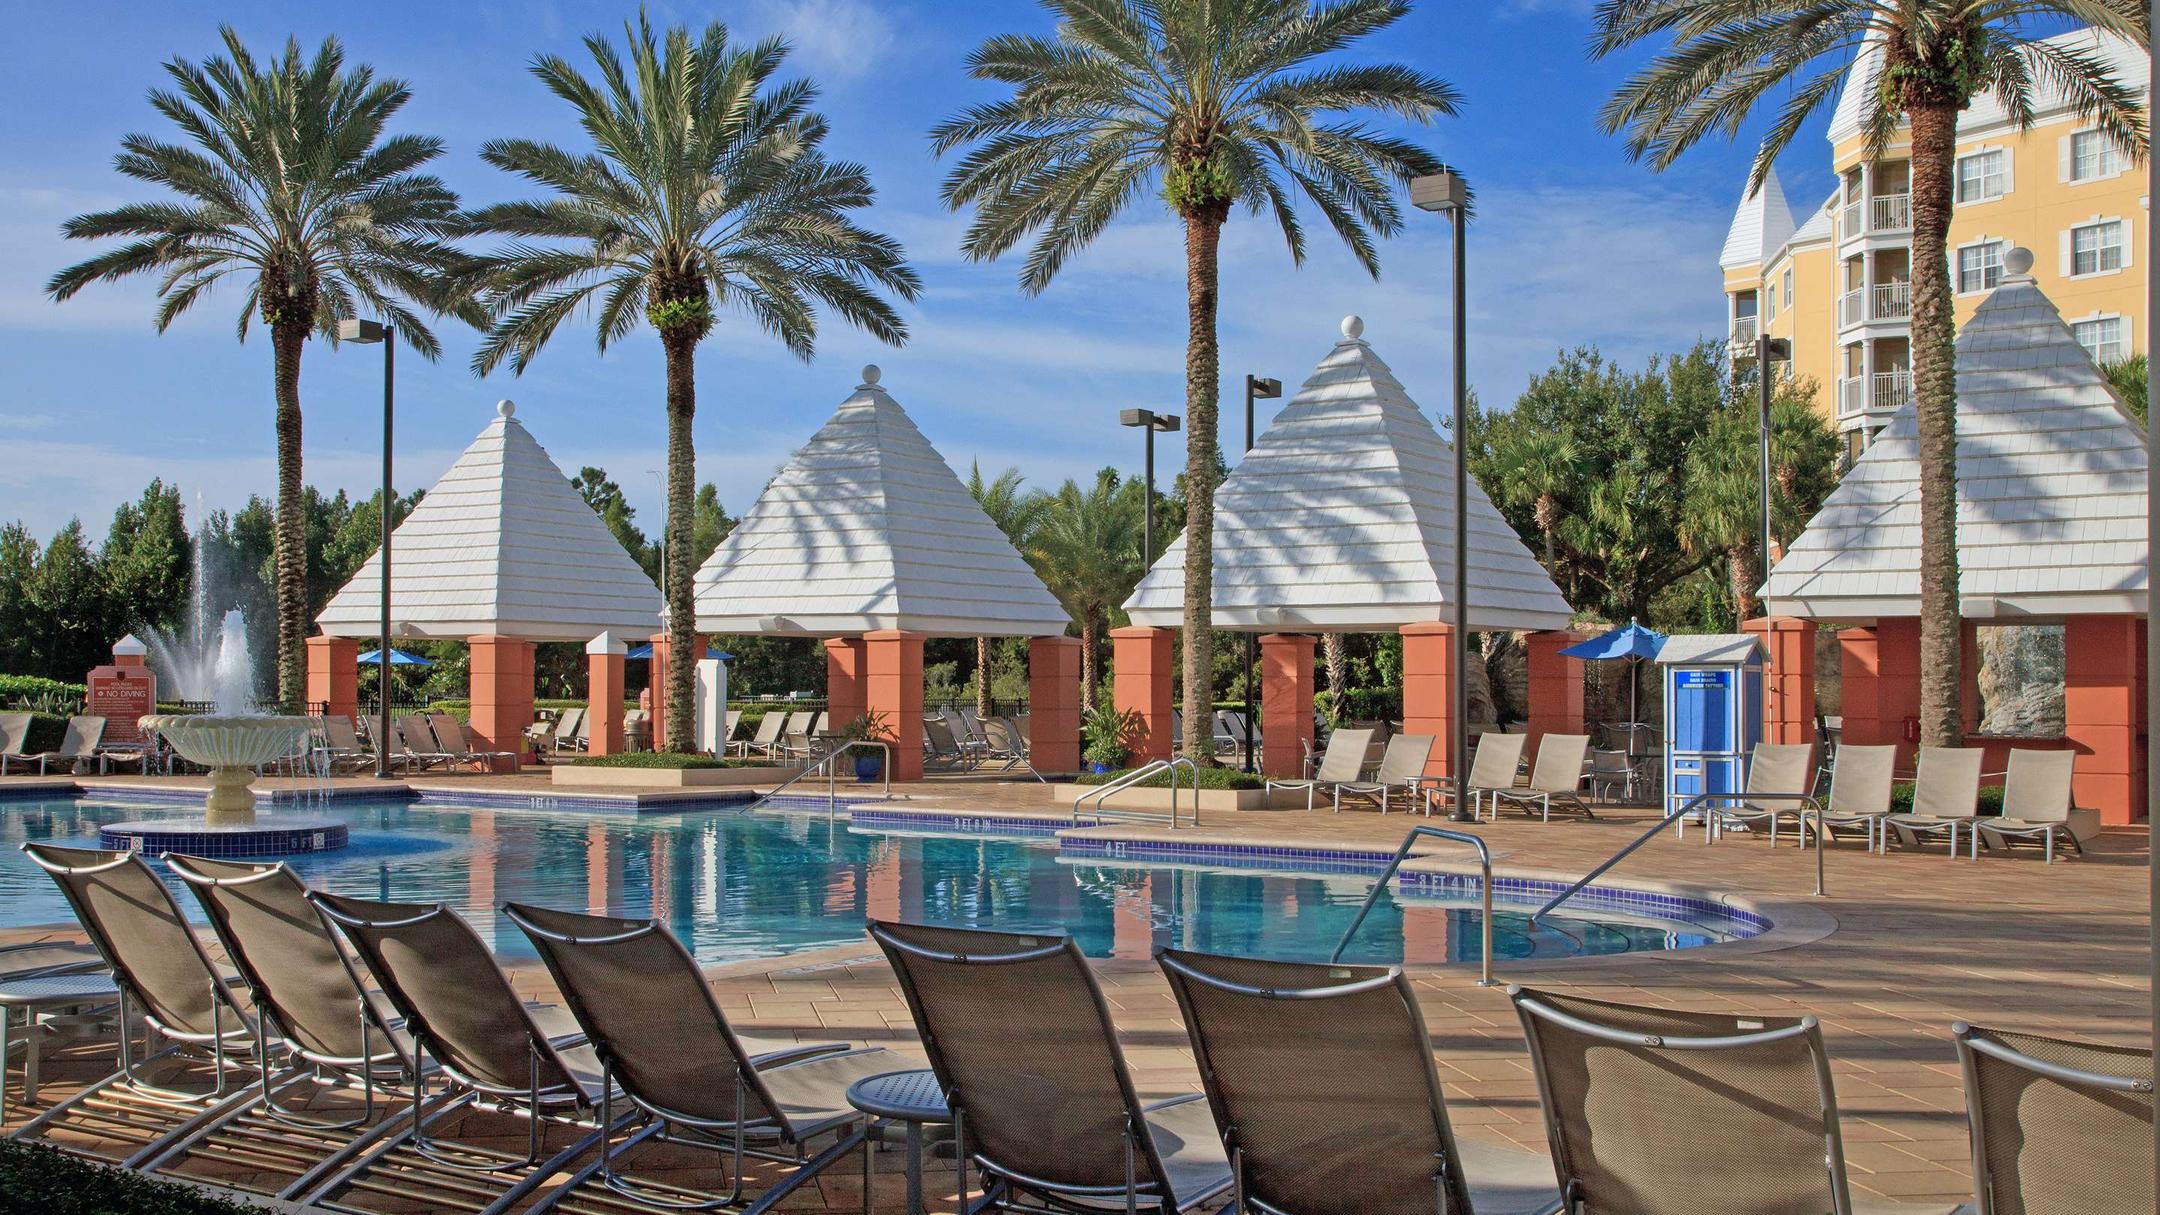 Hilton Grand Vacations Club Seaworld Orlando In Orlando The United States From 81 Deals